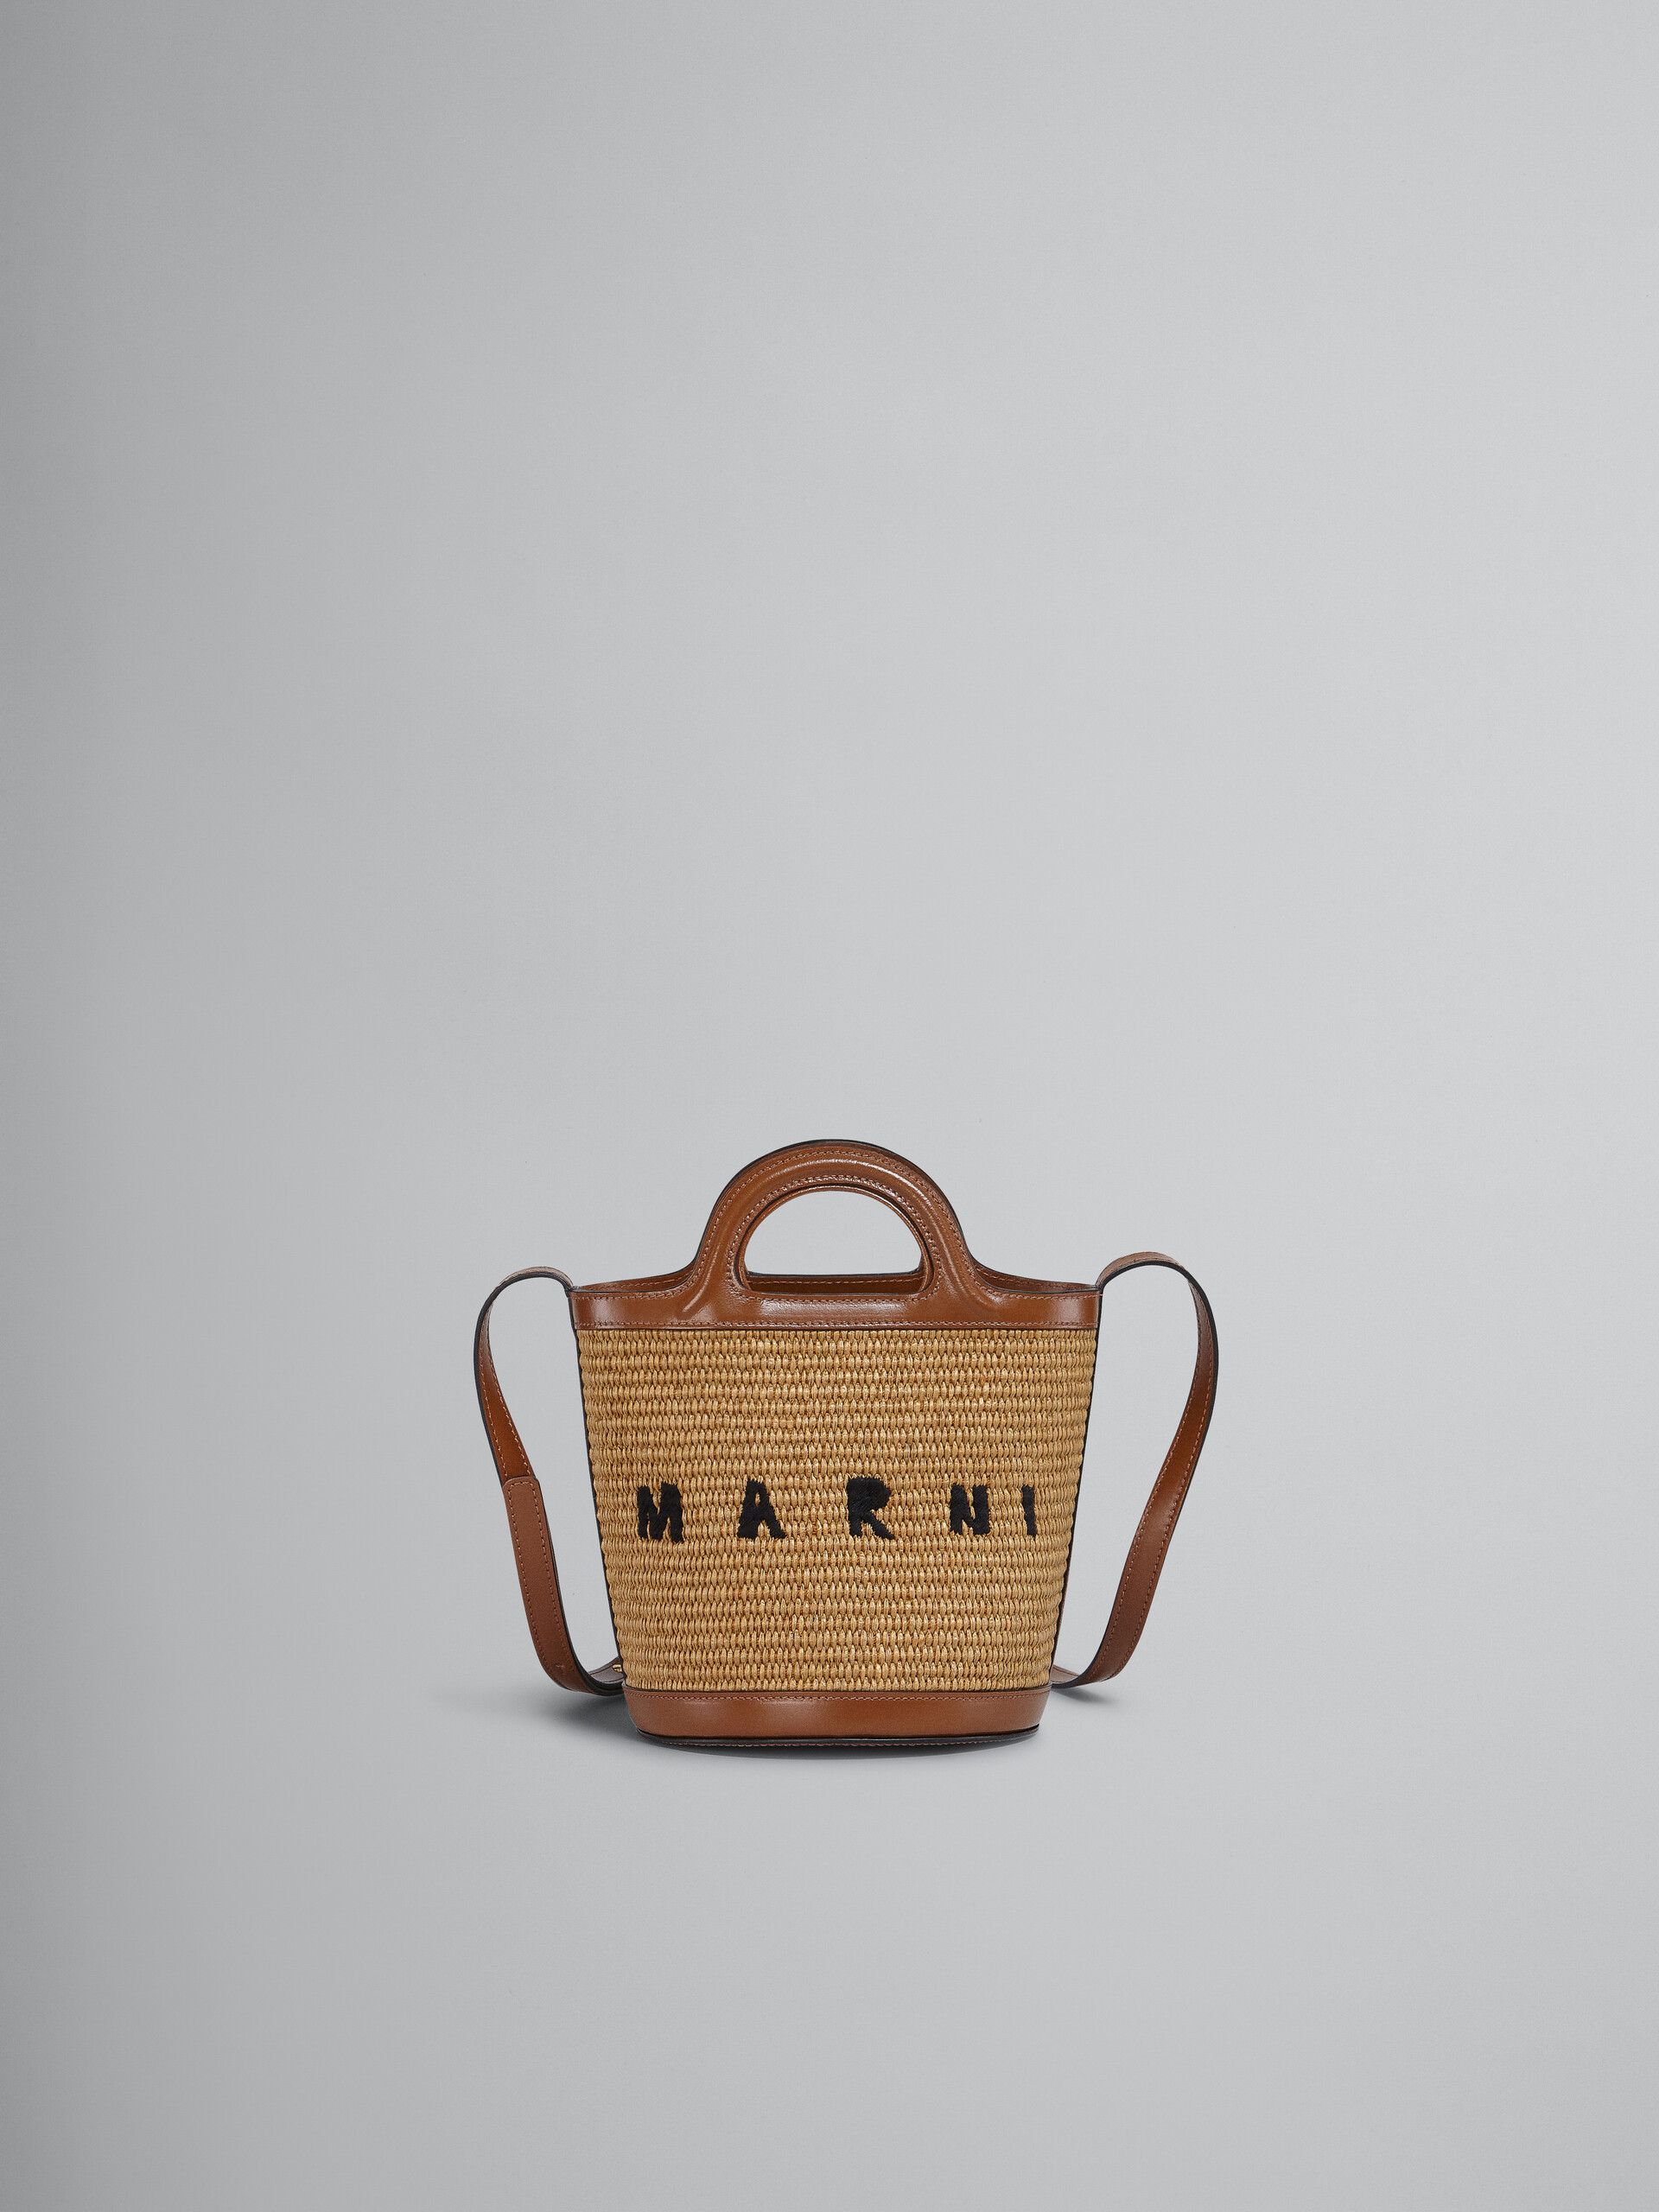 Tropicalia Small Bucket Bag in brown leather and raffia - Shoulder Bag - Image 1